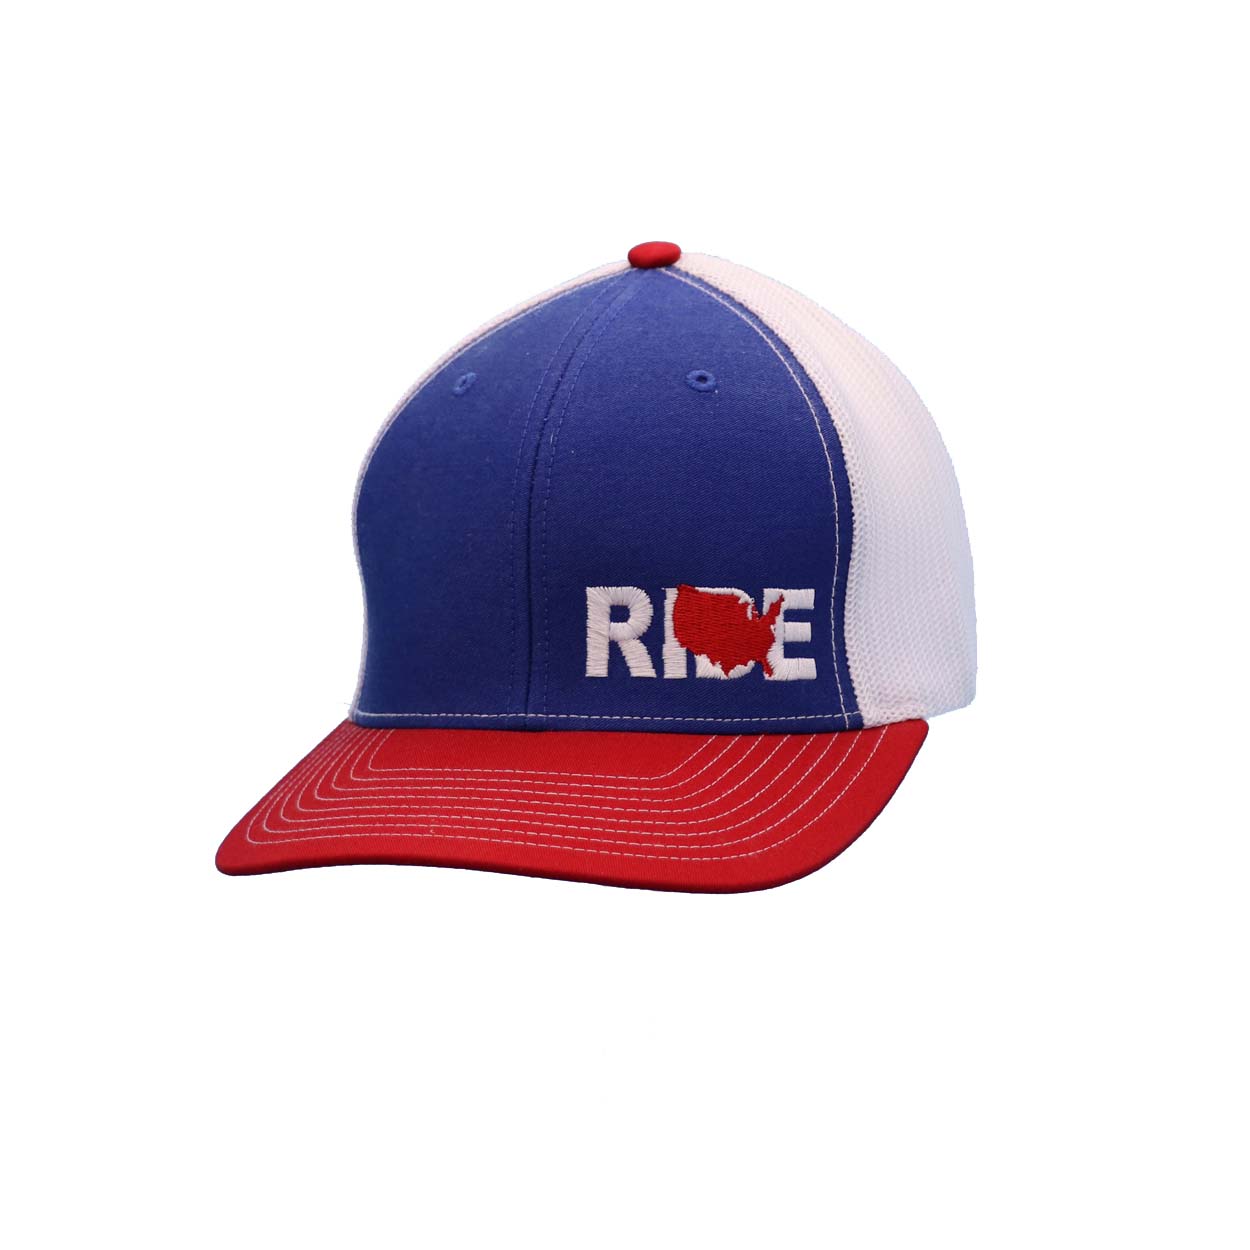 Ride United States Night Out Embroidered Snapback Trucker Hat Red/White/Blue